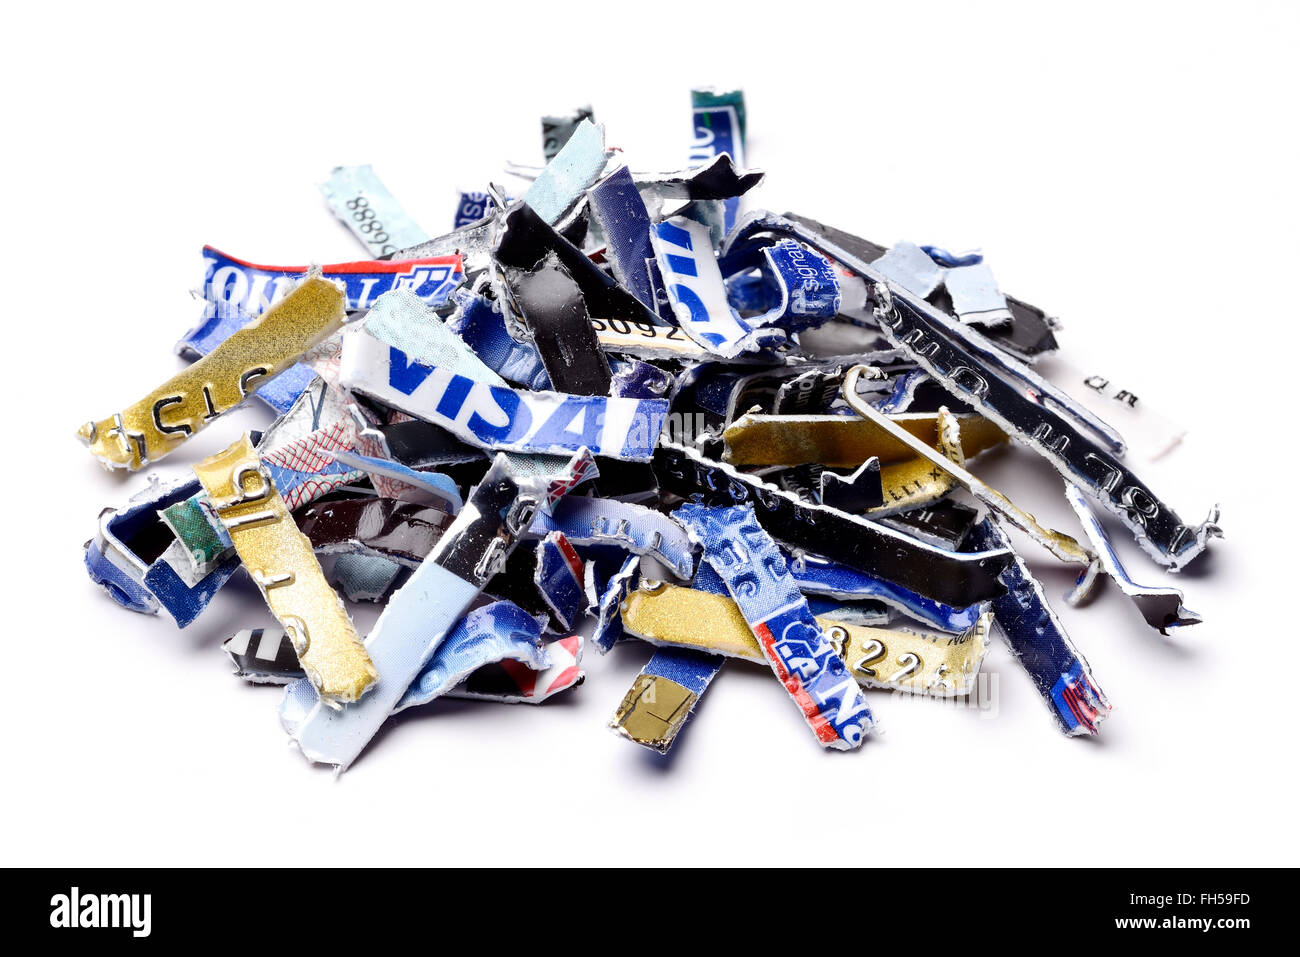 Bank credit cards and debit cards that have been security shredded Stock Photo